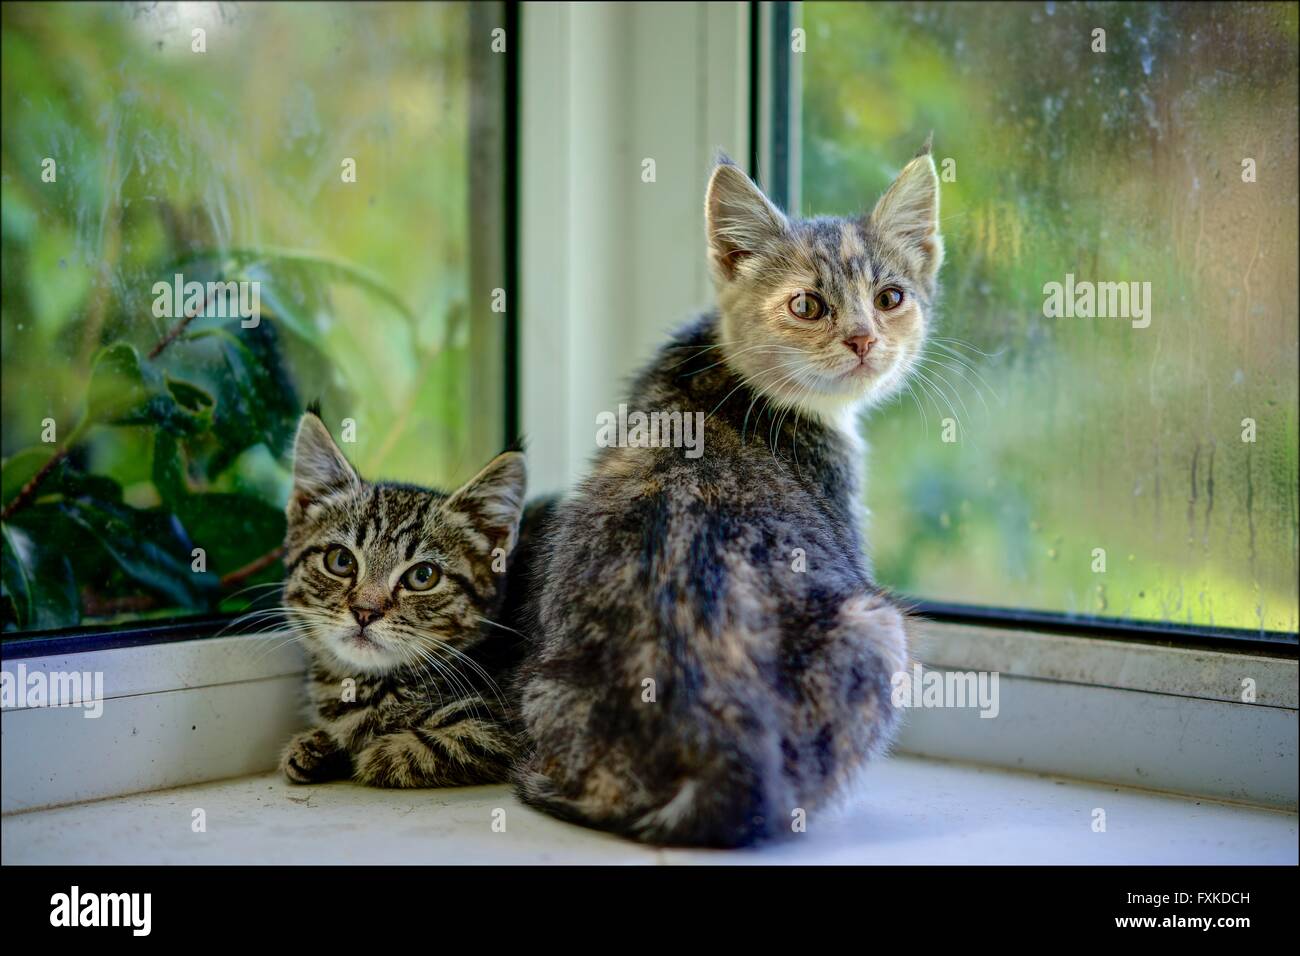 Two feral kittens brother and sister, Tigger and Princess, a Tabby and a Diluted Tortie, cornered in a sun room looking timid Stock Photo